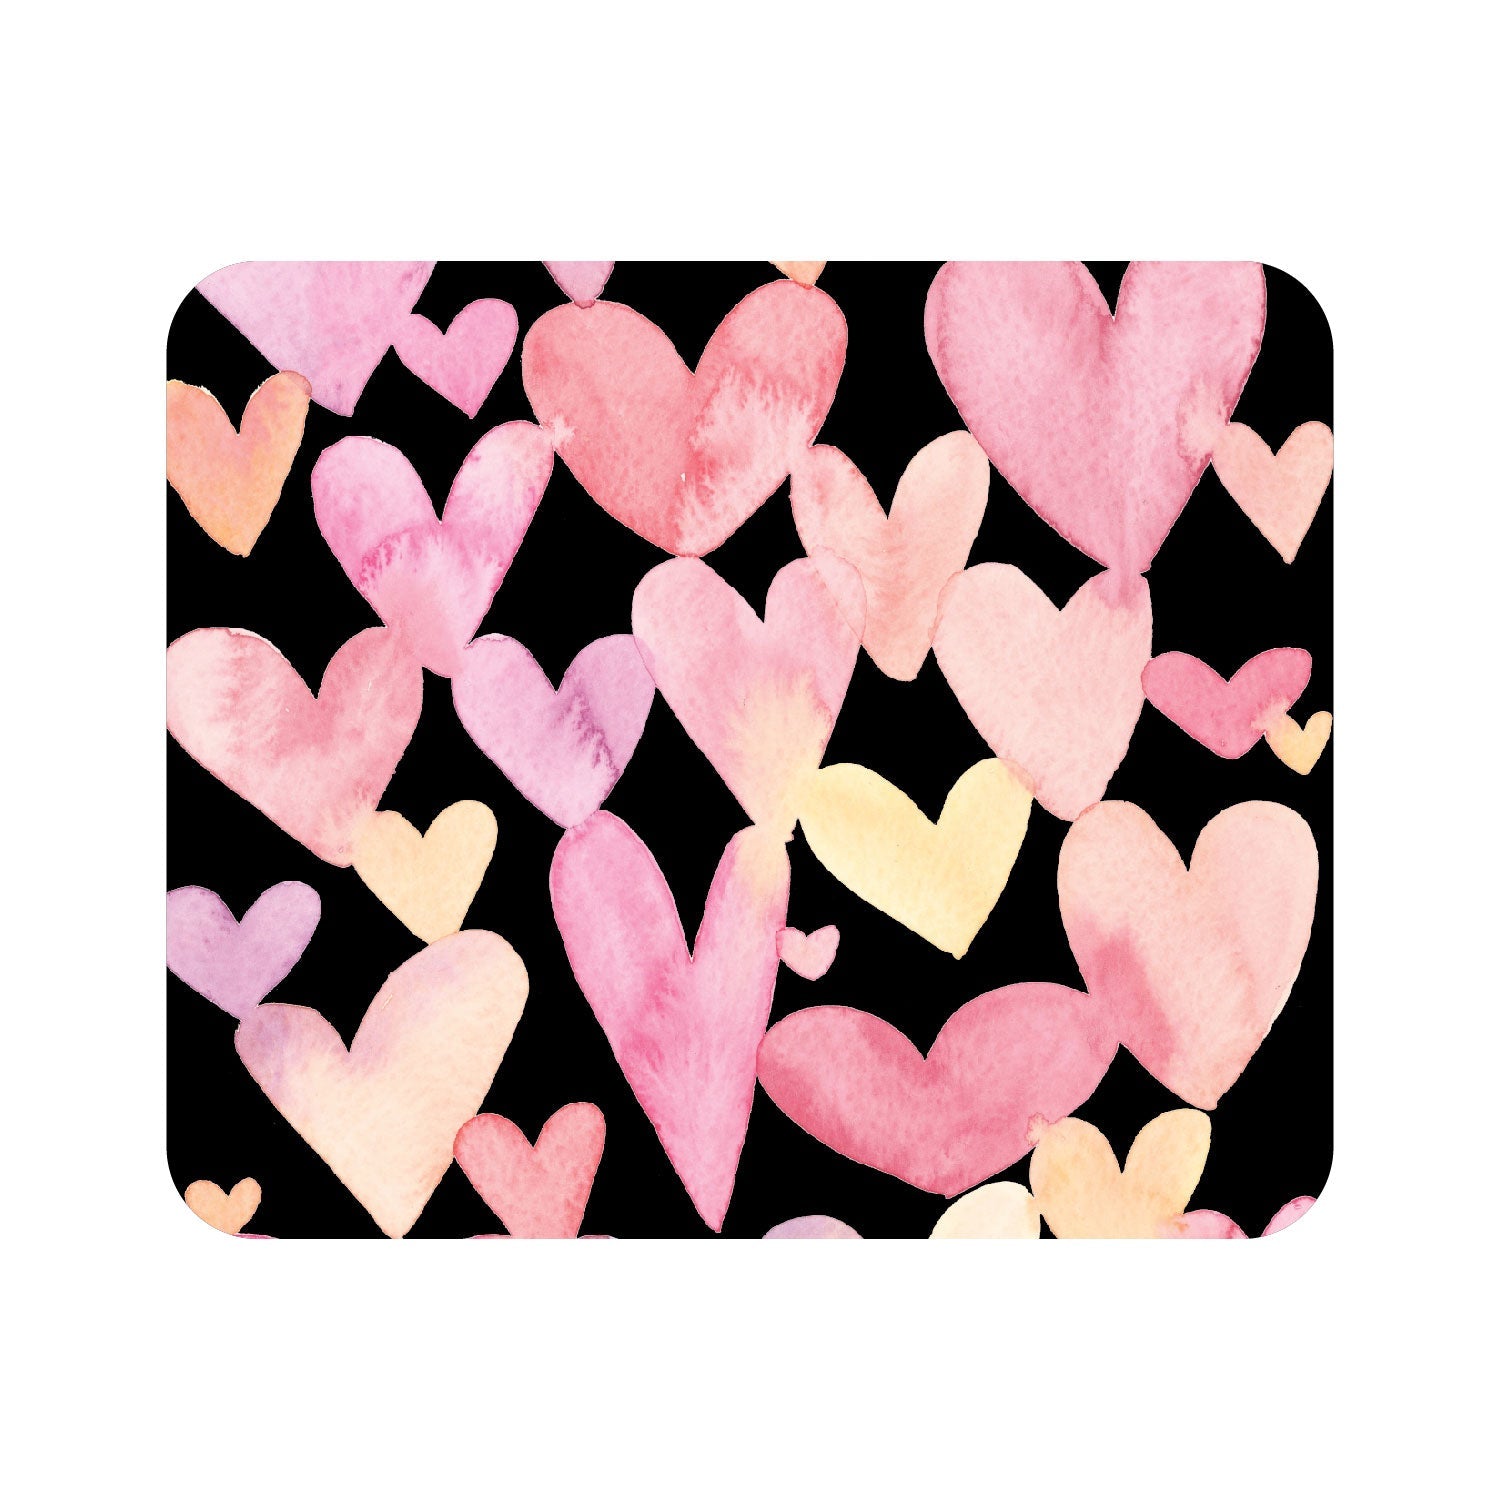 Prints Series Mouse Pad, So Many Hearts